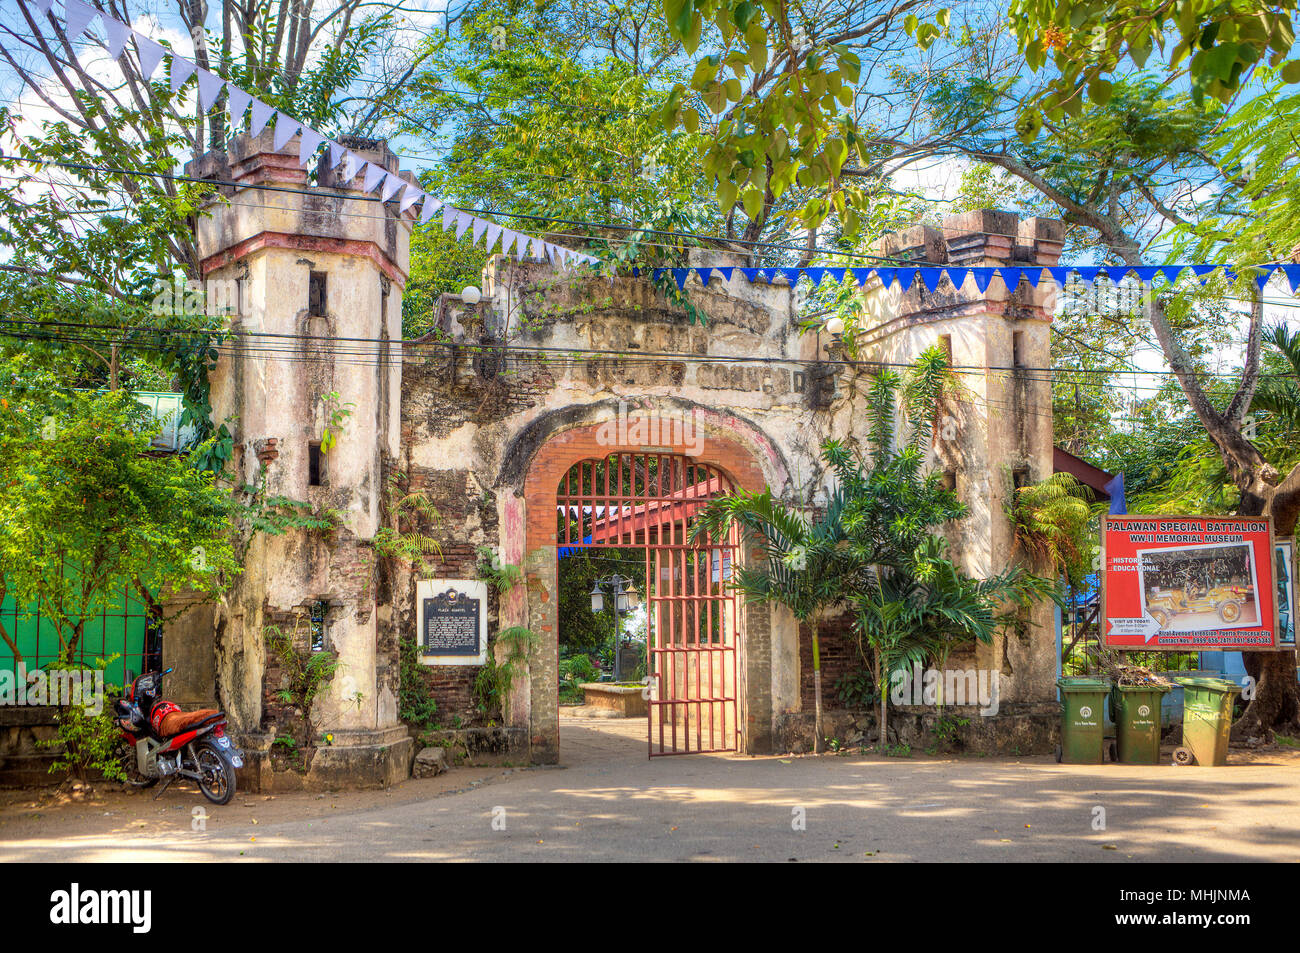 Plaza Cuartel was a WW2 Japanese prison camp, now a museum and shrine, dedicated to 143 American POW soldiers burned to death by the Japanese. Stock Photo